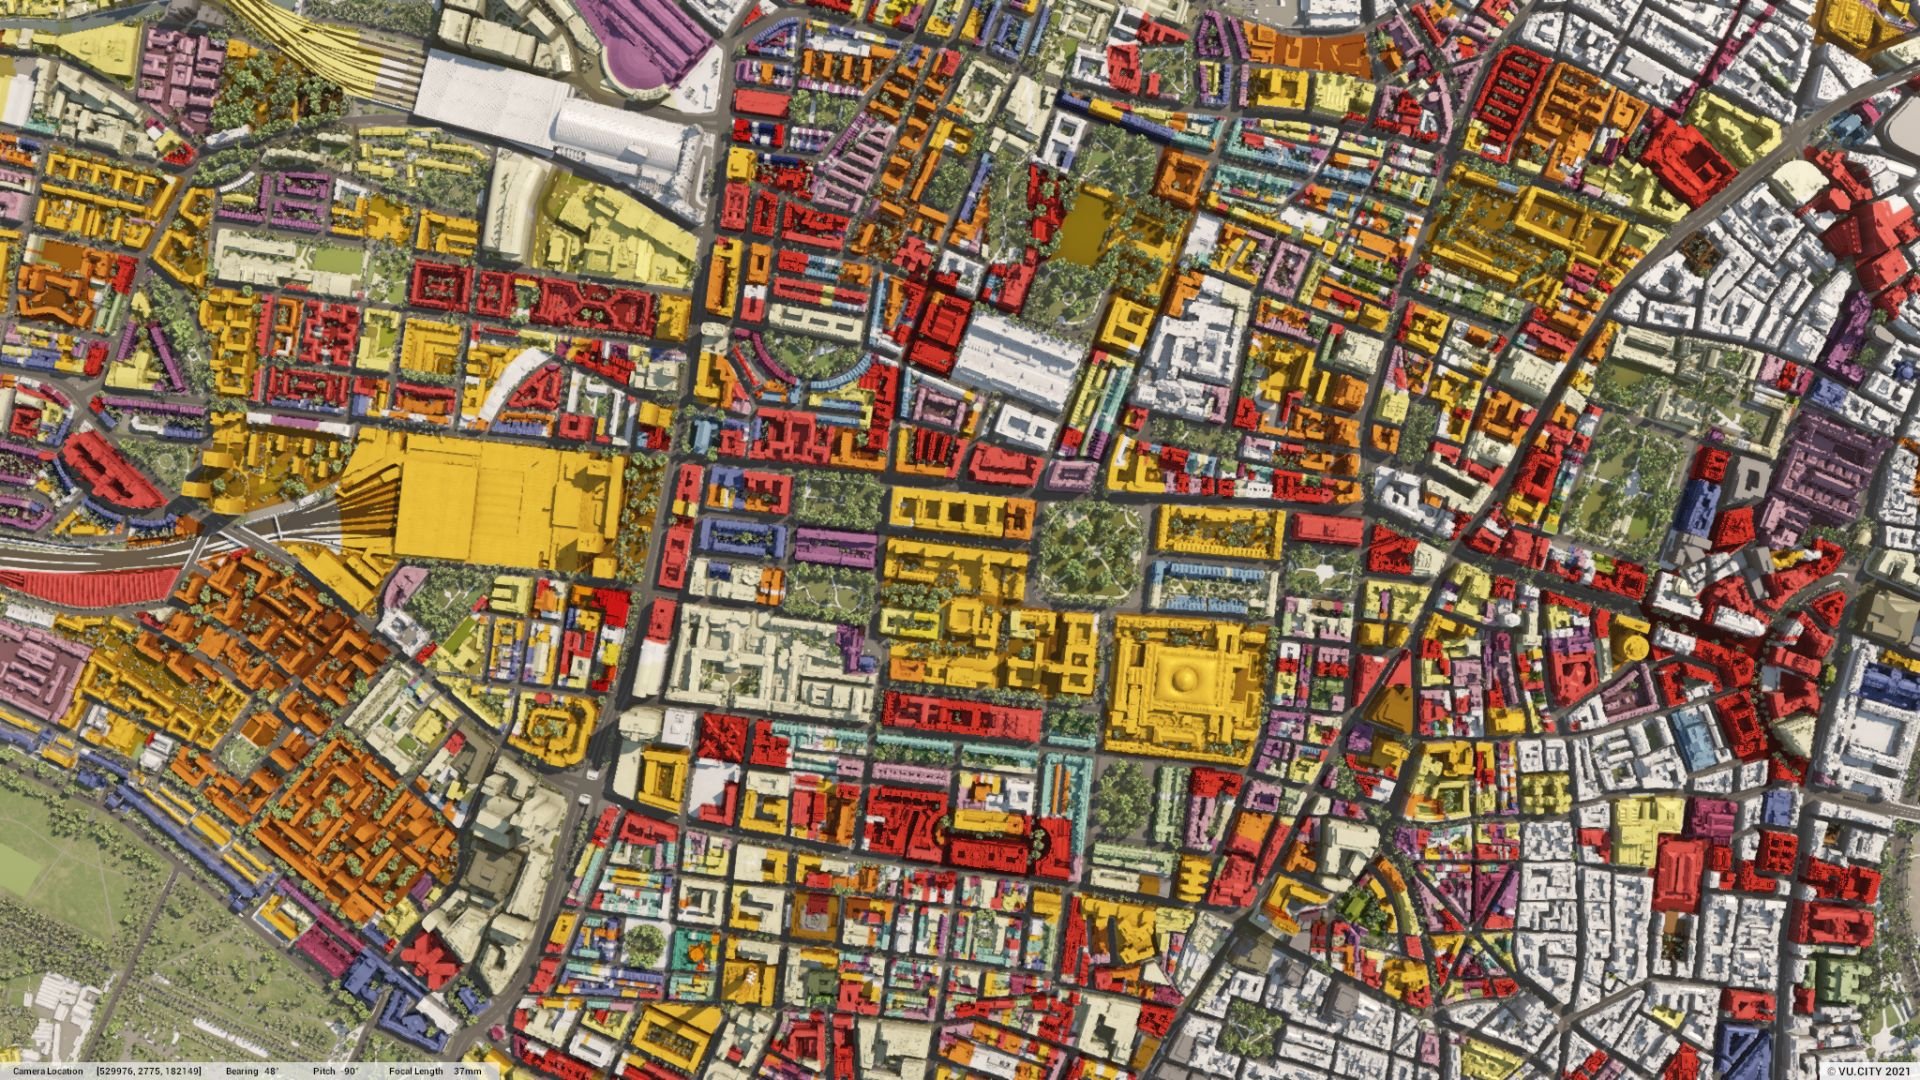 Building Age Dates from Colouring London